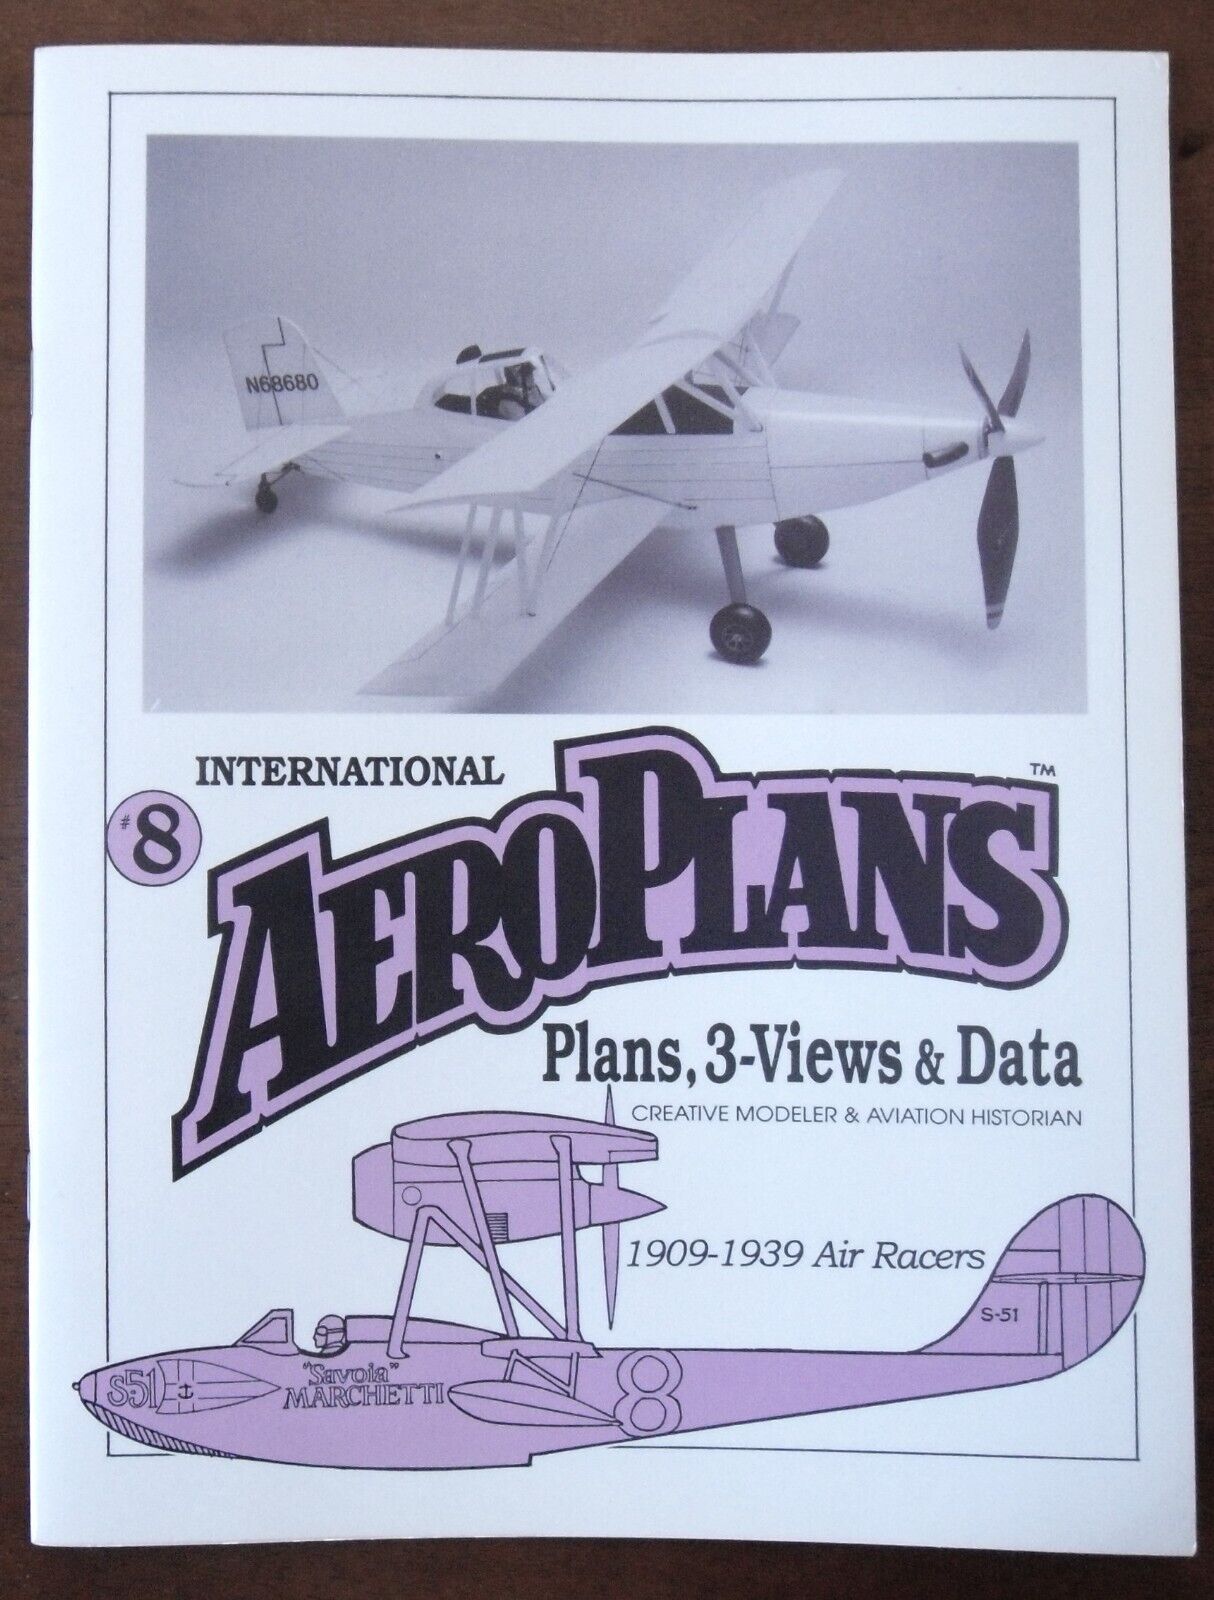 AEROPLANS Plans, 3-views & Data #8, 1909-1939 Air Racers, model airplanes, book